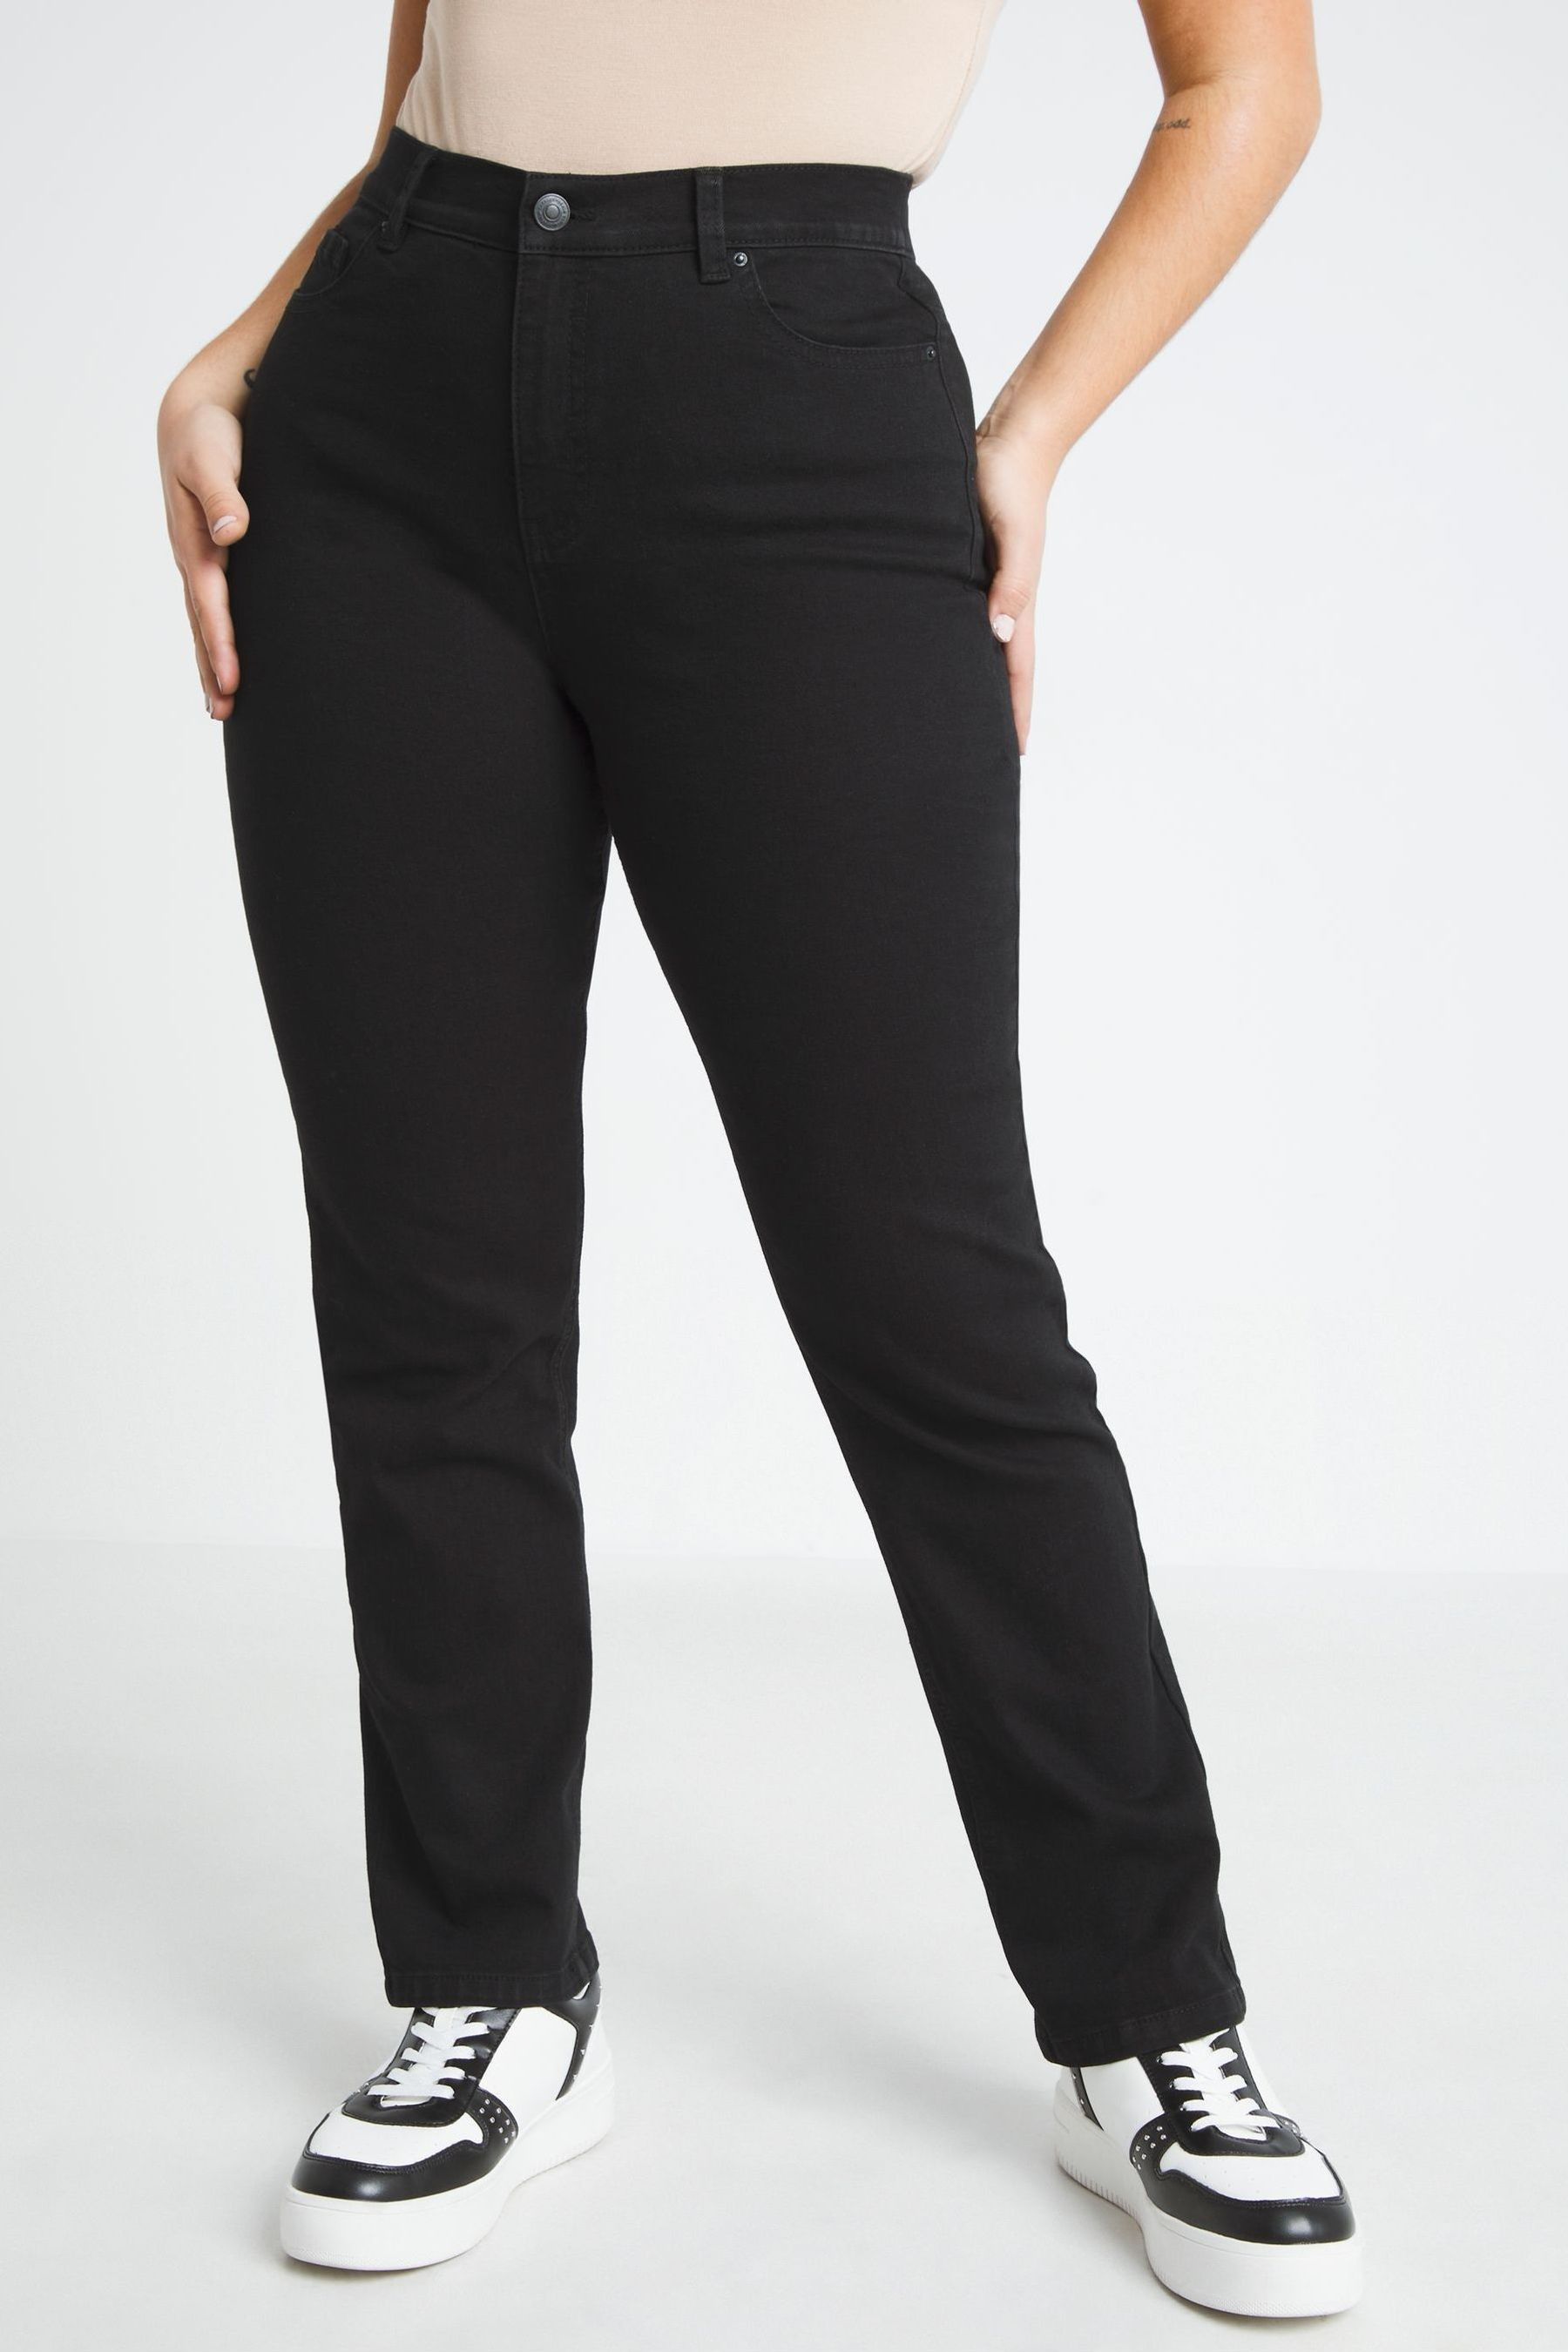 Buy Simply Be Black 24/7 Straight Leg Jeans from the Next UK online shop